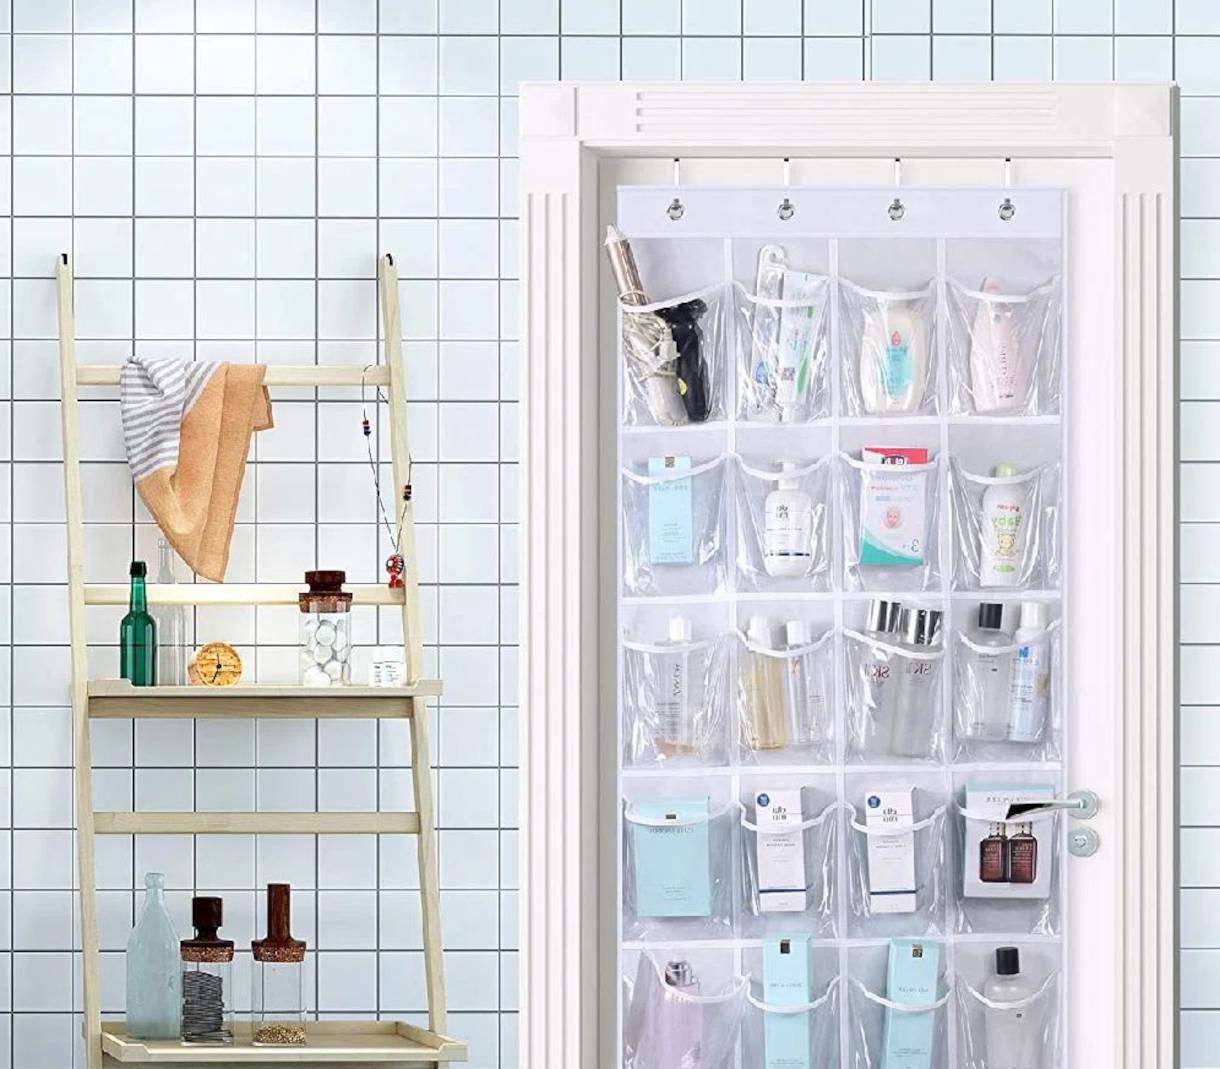 Photo of a shoe organizer used as a shower caddy